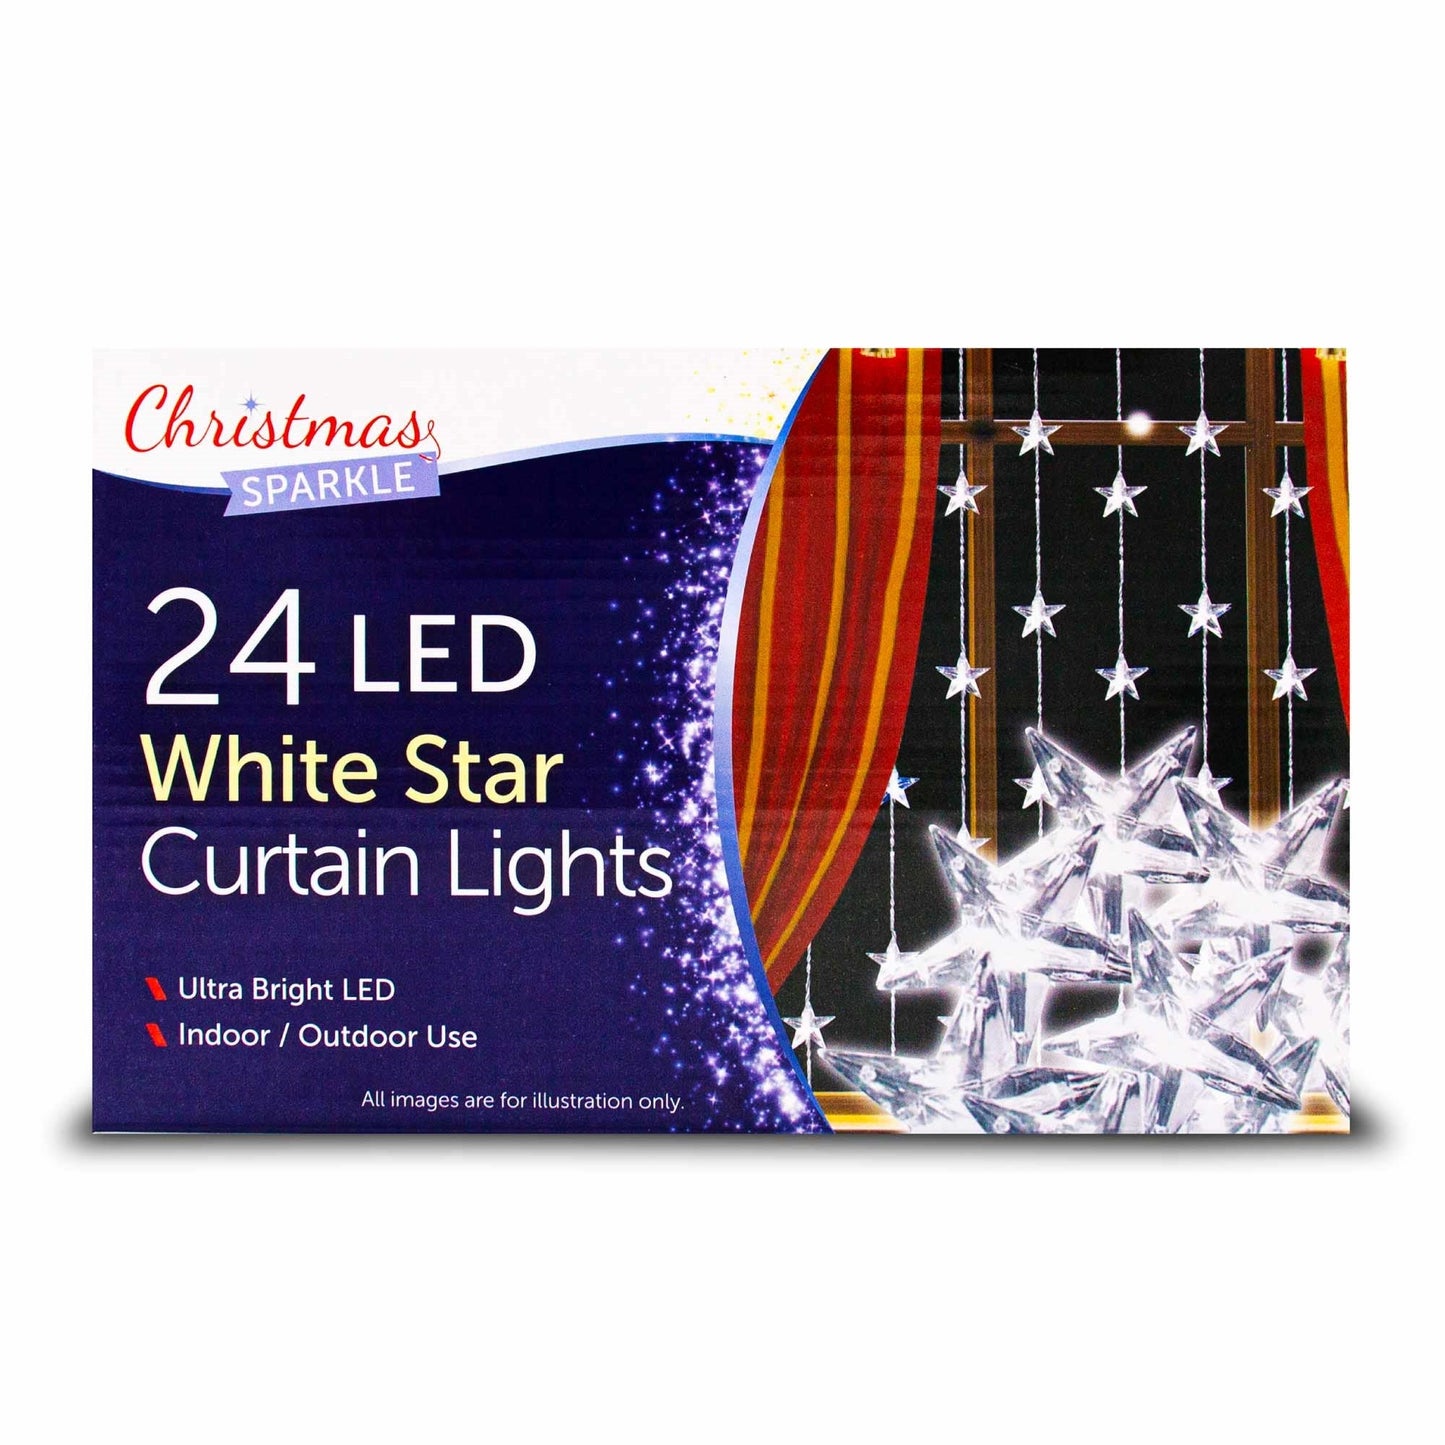 Christmas Sparkle Curtain Lights x 24 White LEDs - Mains Operated